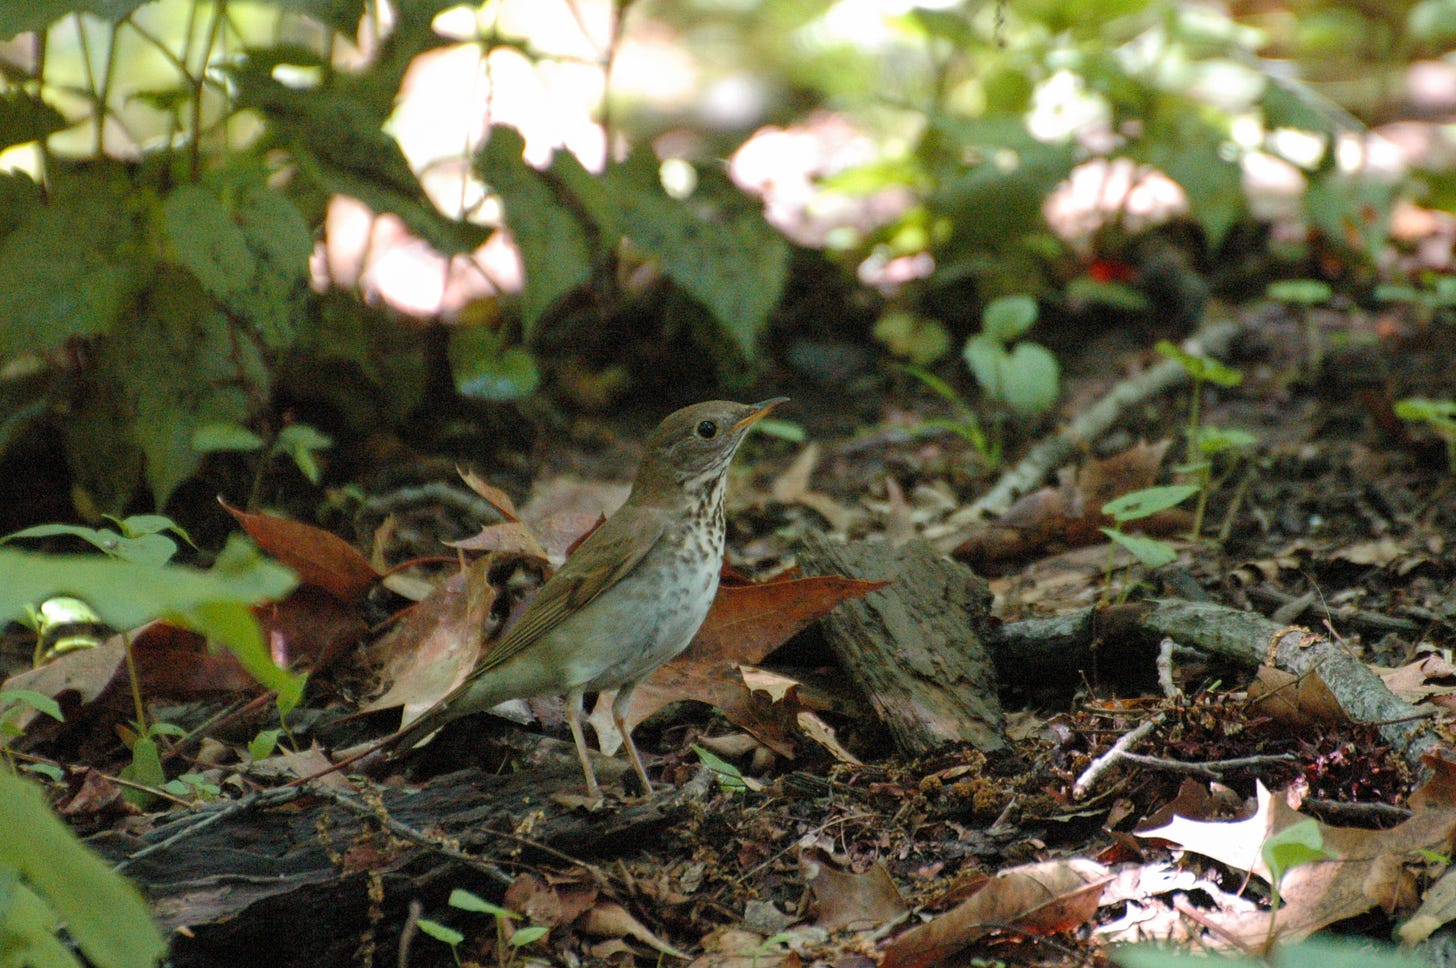 The thrush stands on the ground, looking up and to the right. Some plants grow on the forest floor, which is strewn with bark and leaves.